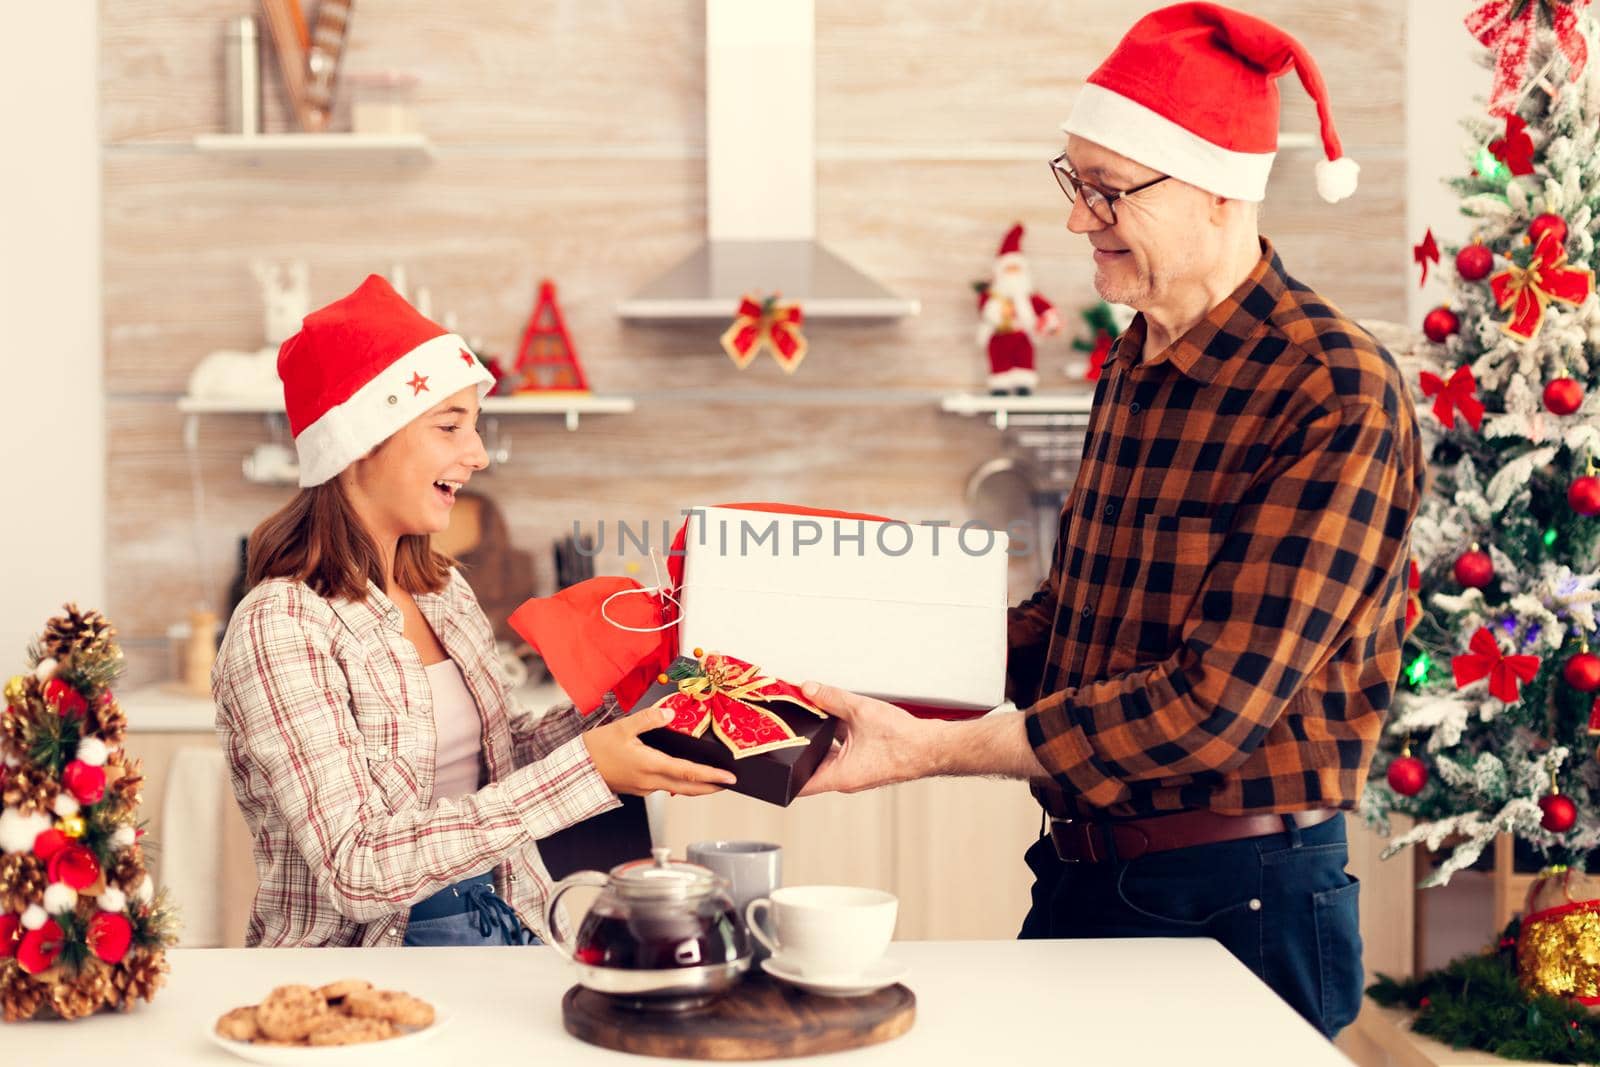 Happy grandchild exchanging presents with grandfather celebrating christmas. Senior man wearing santa hat surprising granddaughter with winter holiday gifts in home kitchen with xmas tree in the background.